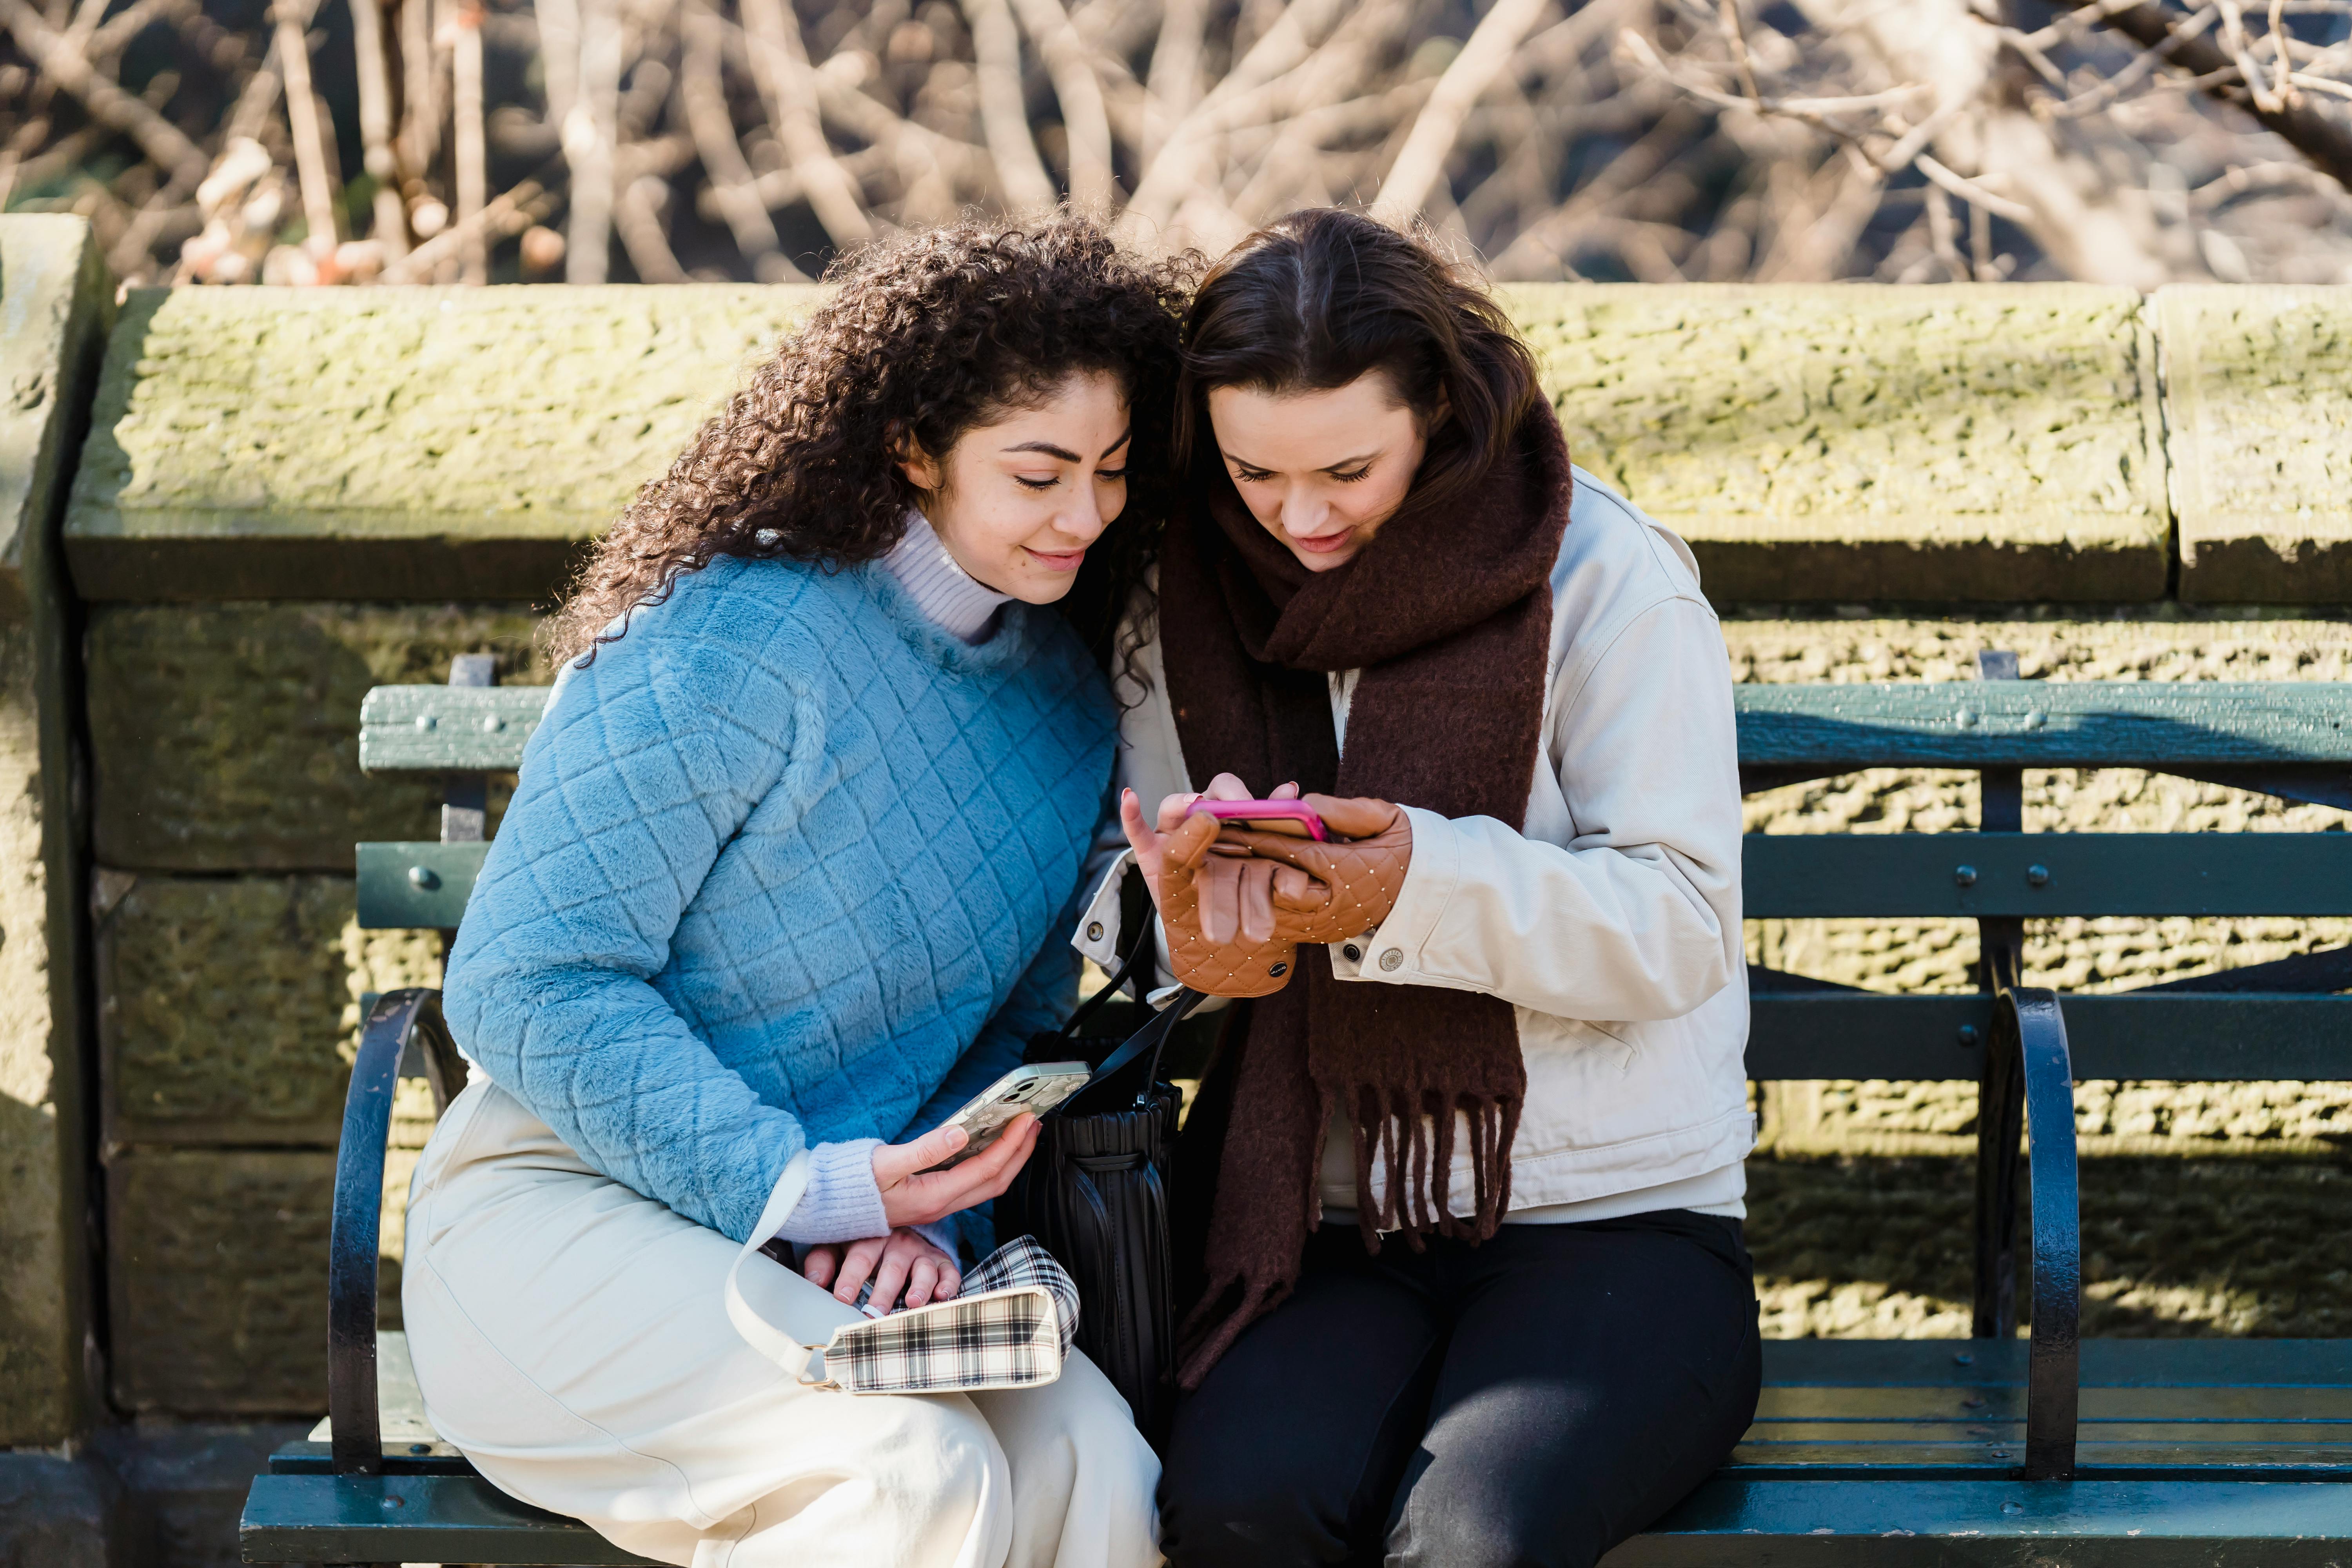 trendy women using smartphone together on bench in park